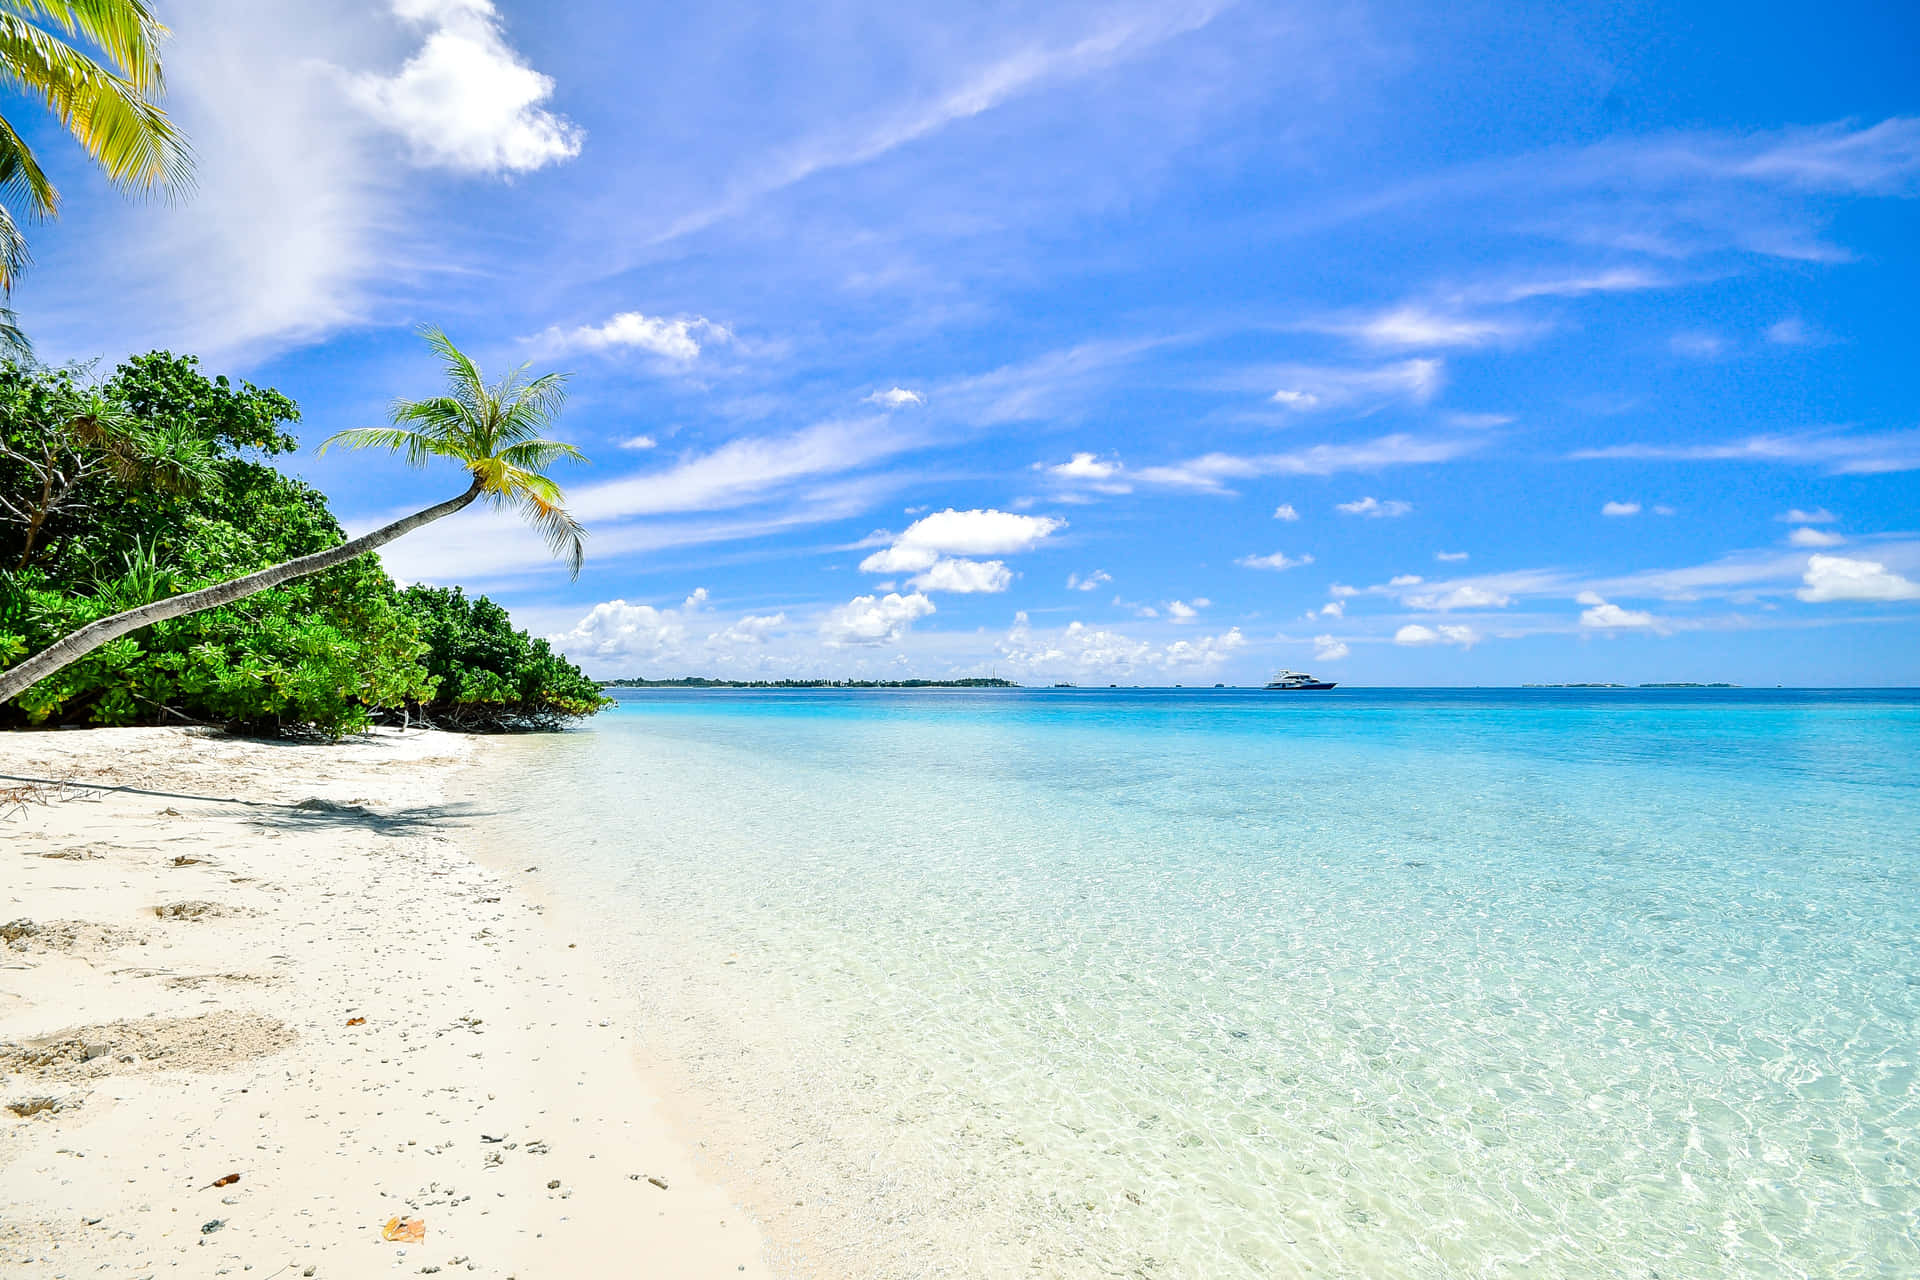 Take in the breathtaking beauty of a stunning beach.